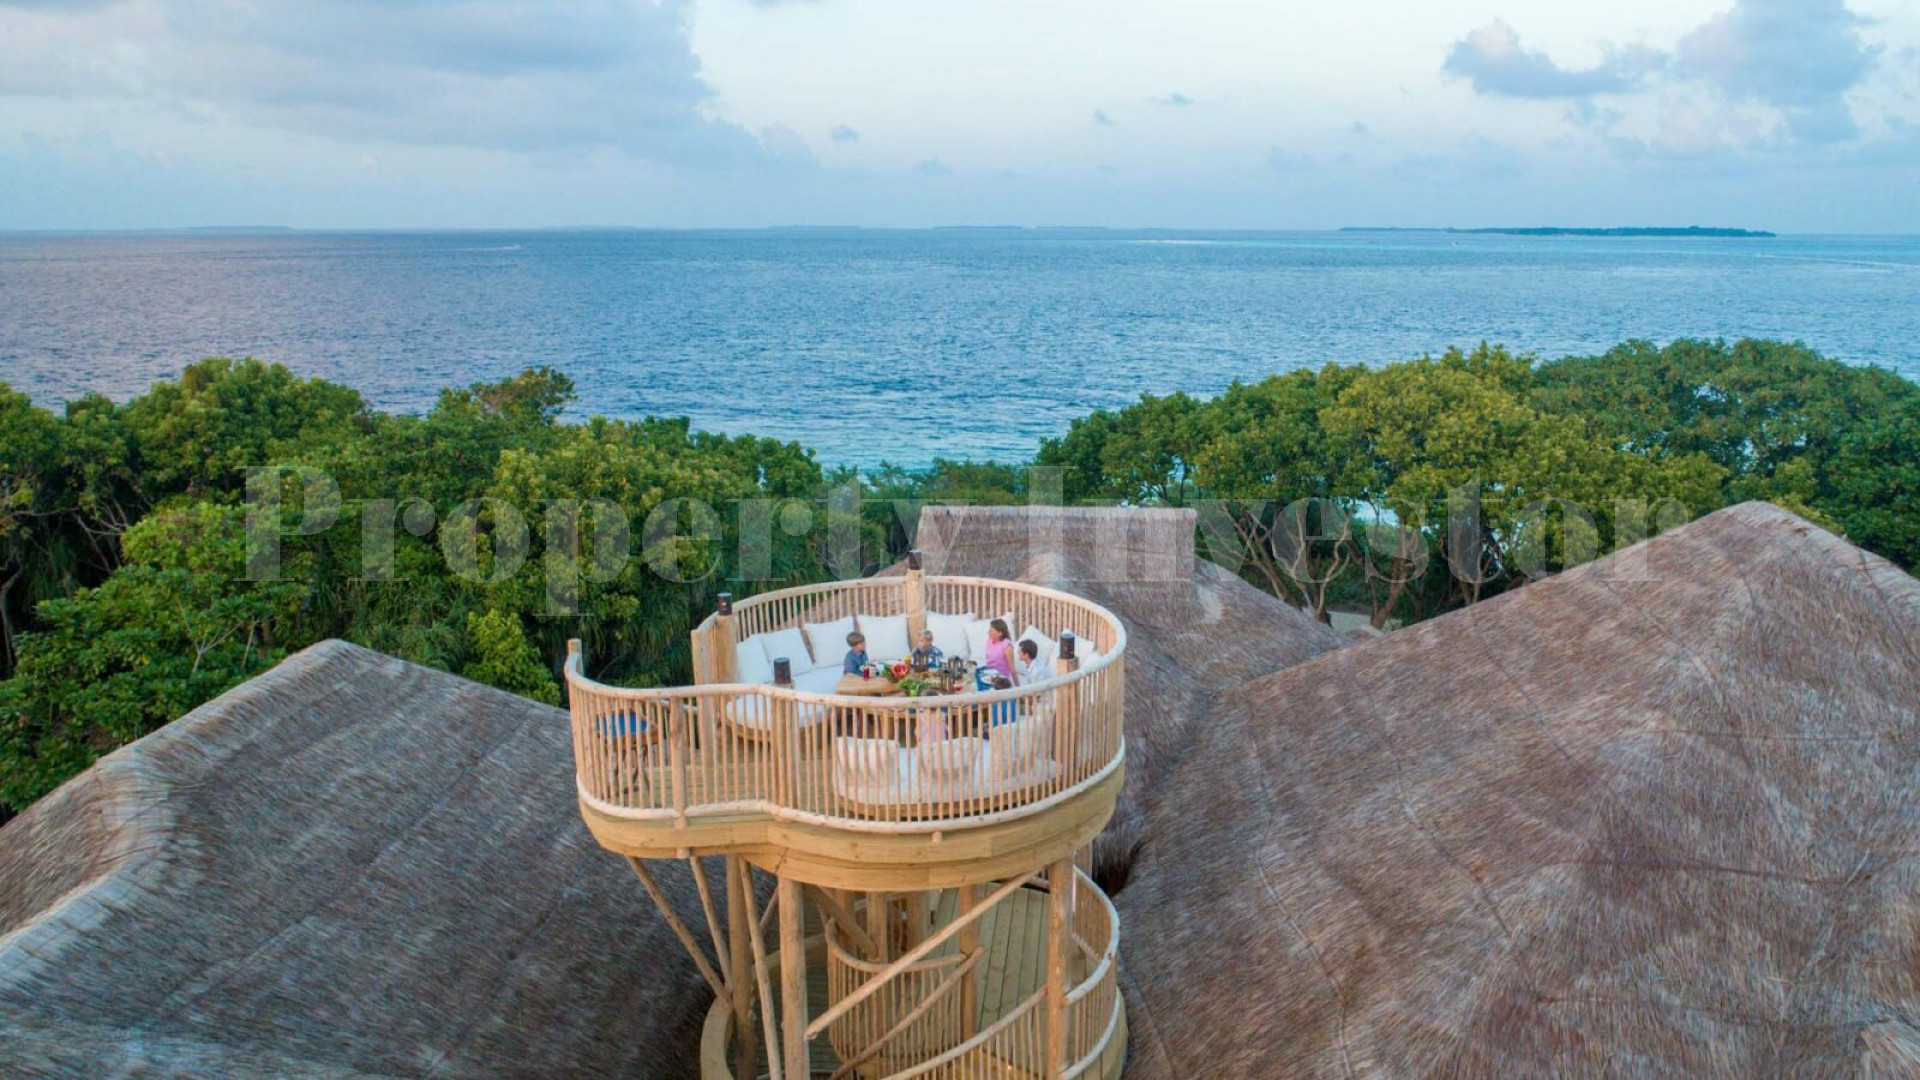 One-of-One 5 Bedroom Luxury Eco Resort Sunrise Villa with Viewing Moonlight Tower for Private Ownership in the Maldives